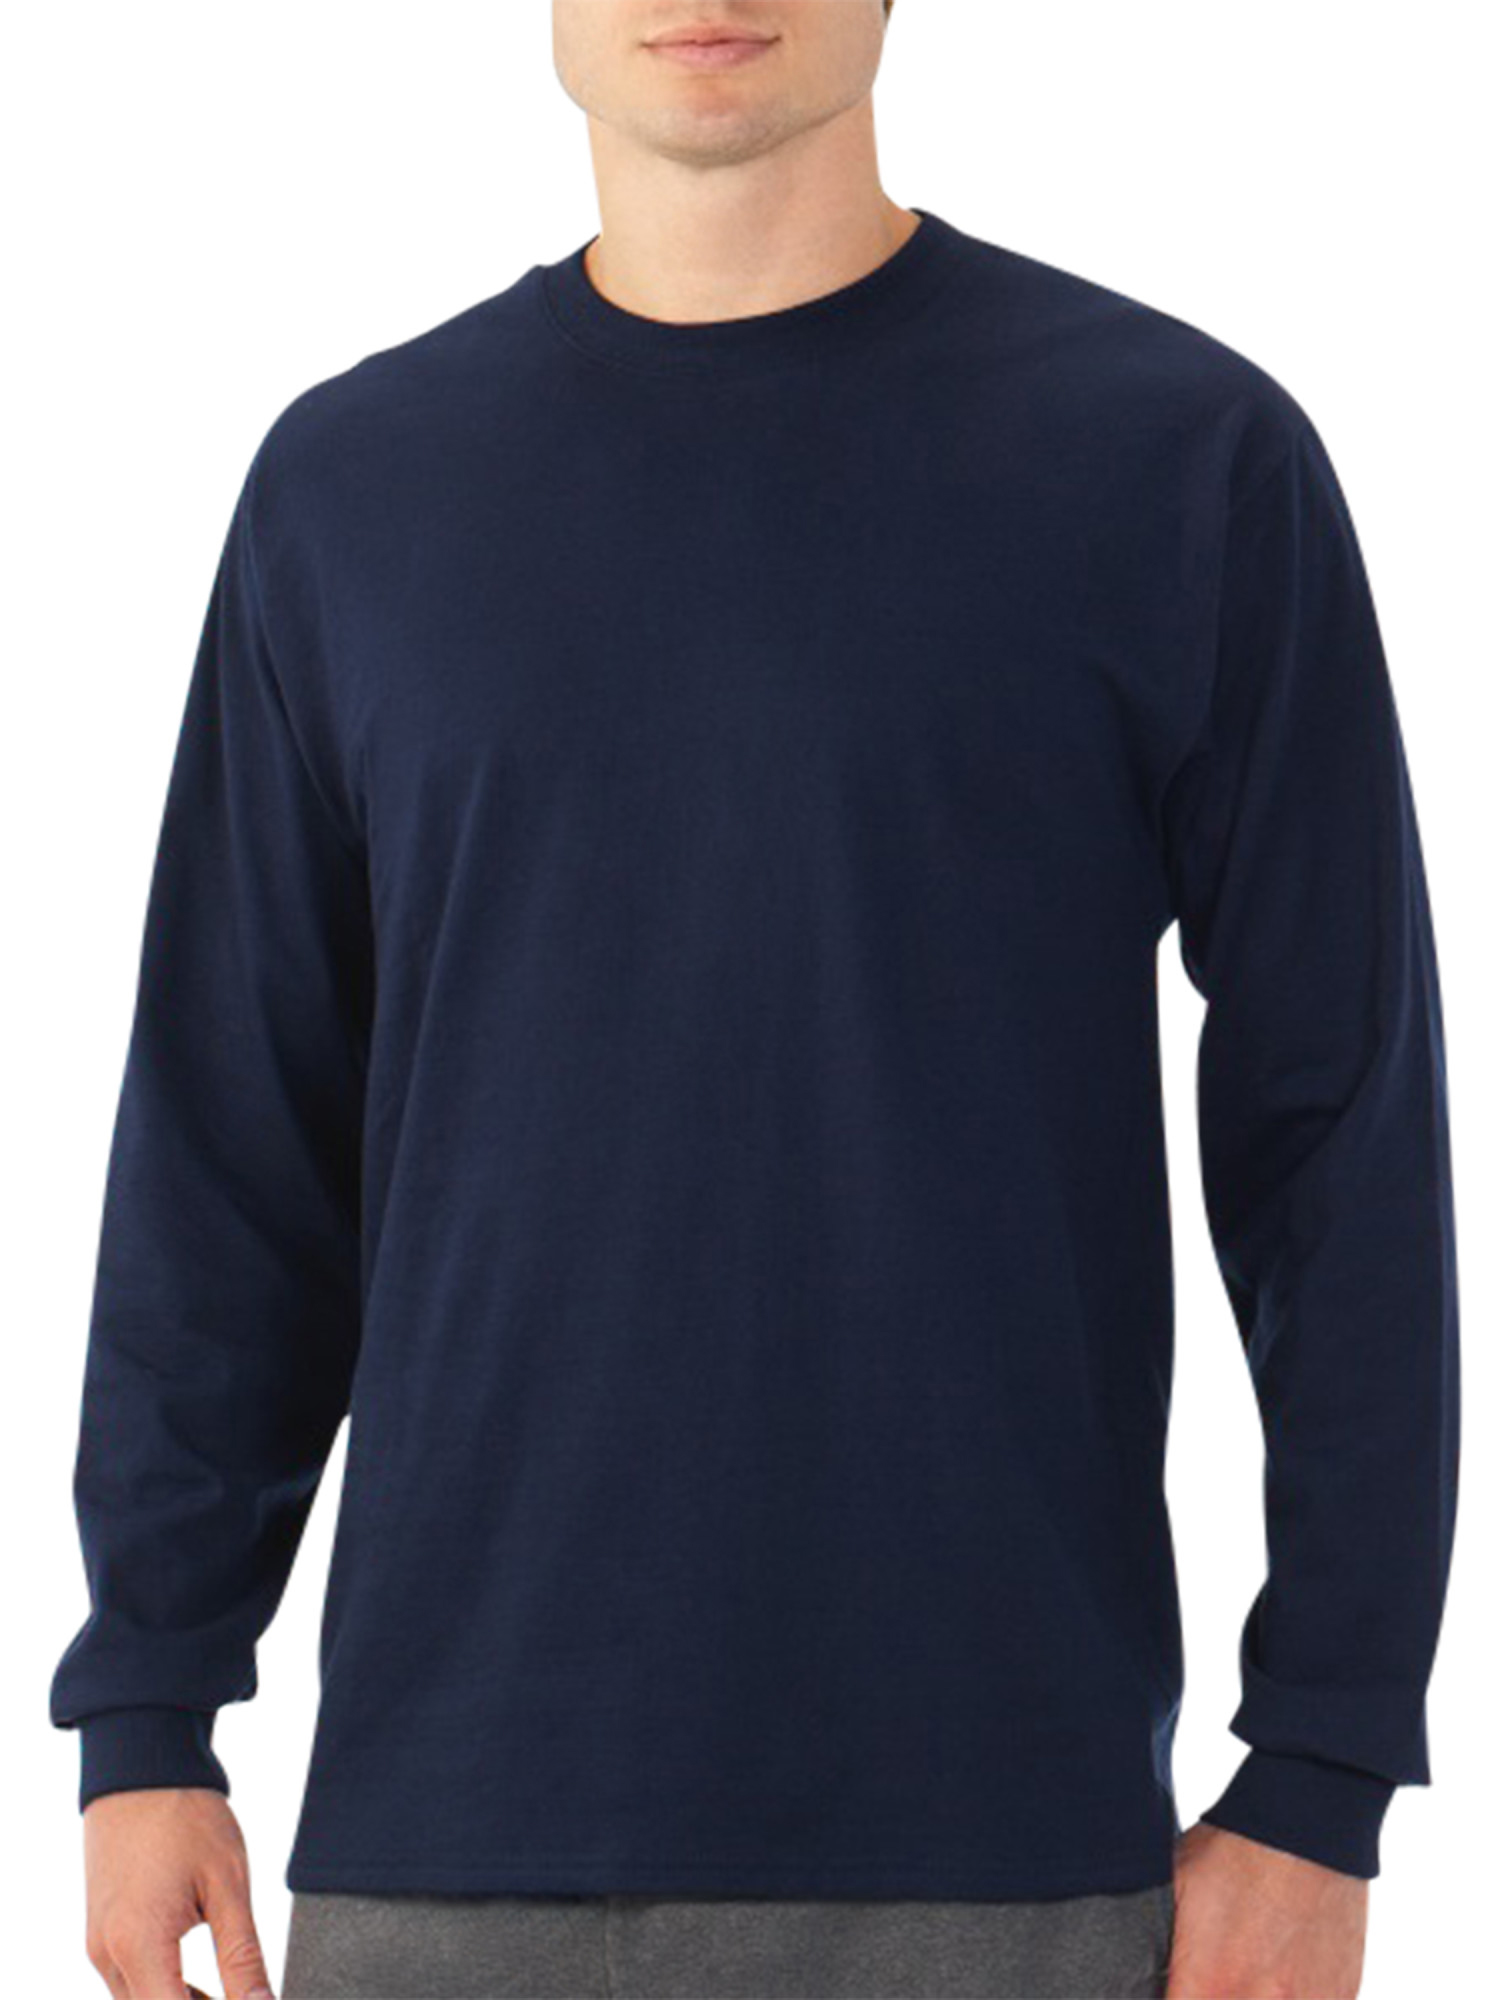 Platinum Eversoft Men's Long Sleeve Crew T Shirt with Rib Cuffs, up